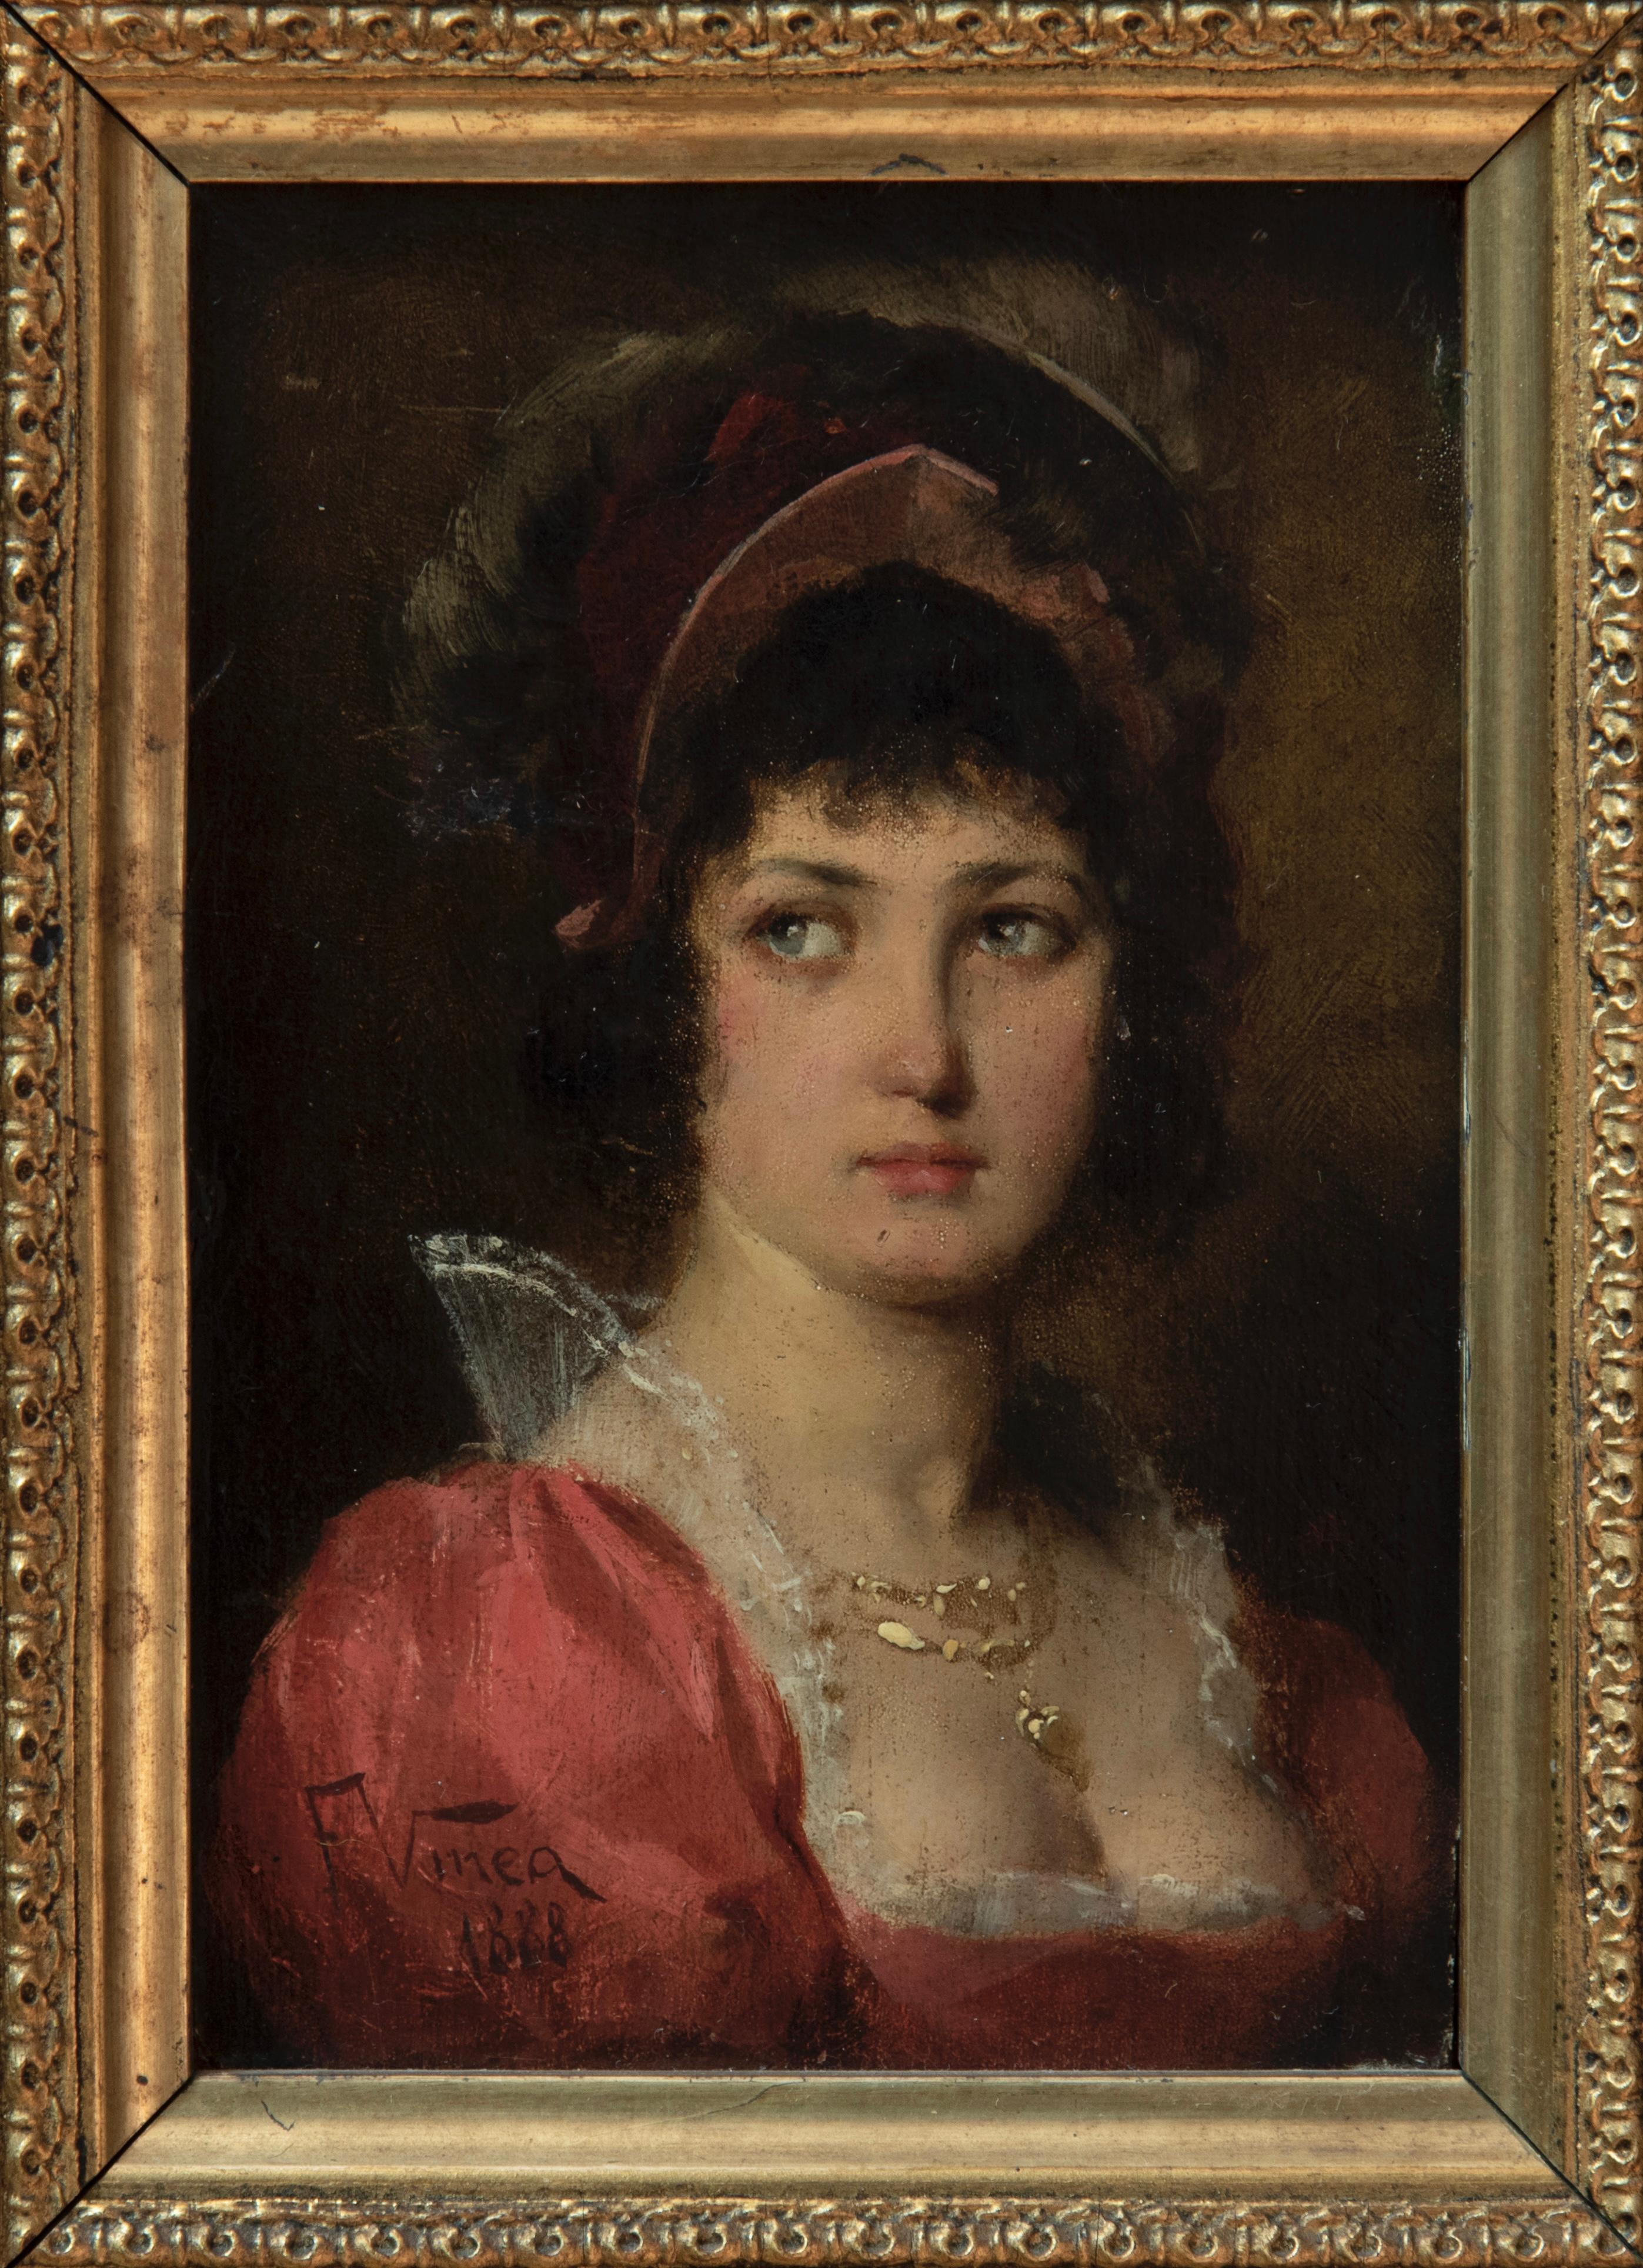 Francesco Vinea portrait of a woman
Portrait of Empire taste
Work by painter Francesco Vinea ( Forli 1845- Florence 1902).
Oil on canvas, depicting a young woman in Empire style in red dress with beautiful gold necklace. Signed and dated at lower